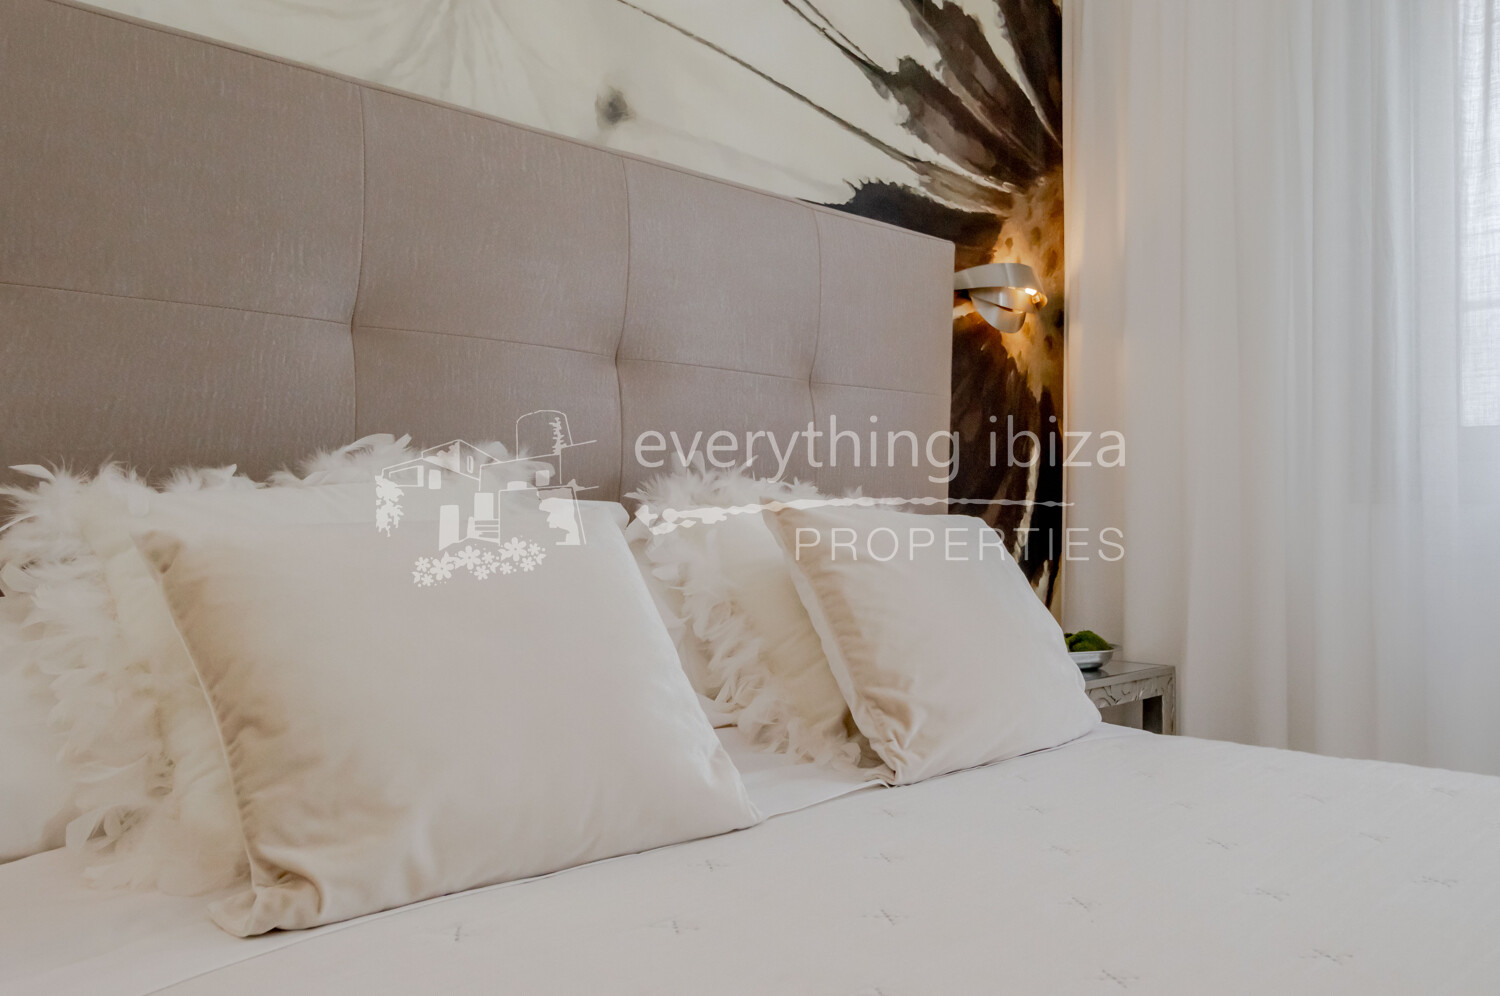 Stylish Furnished Beachfront Apartment in Exclusive Community Near Ibiza Town, ref. 1674, for sale in Ibiza by everything ibiza Properties